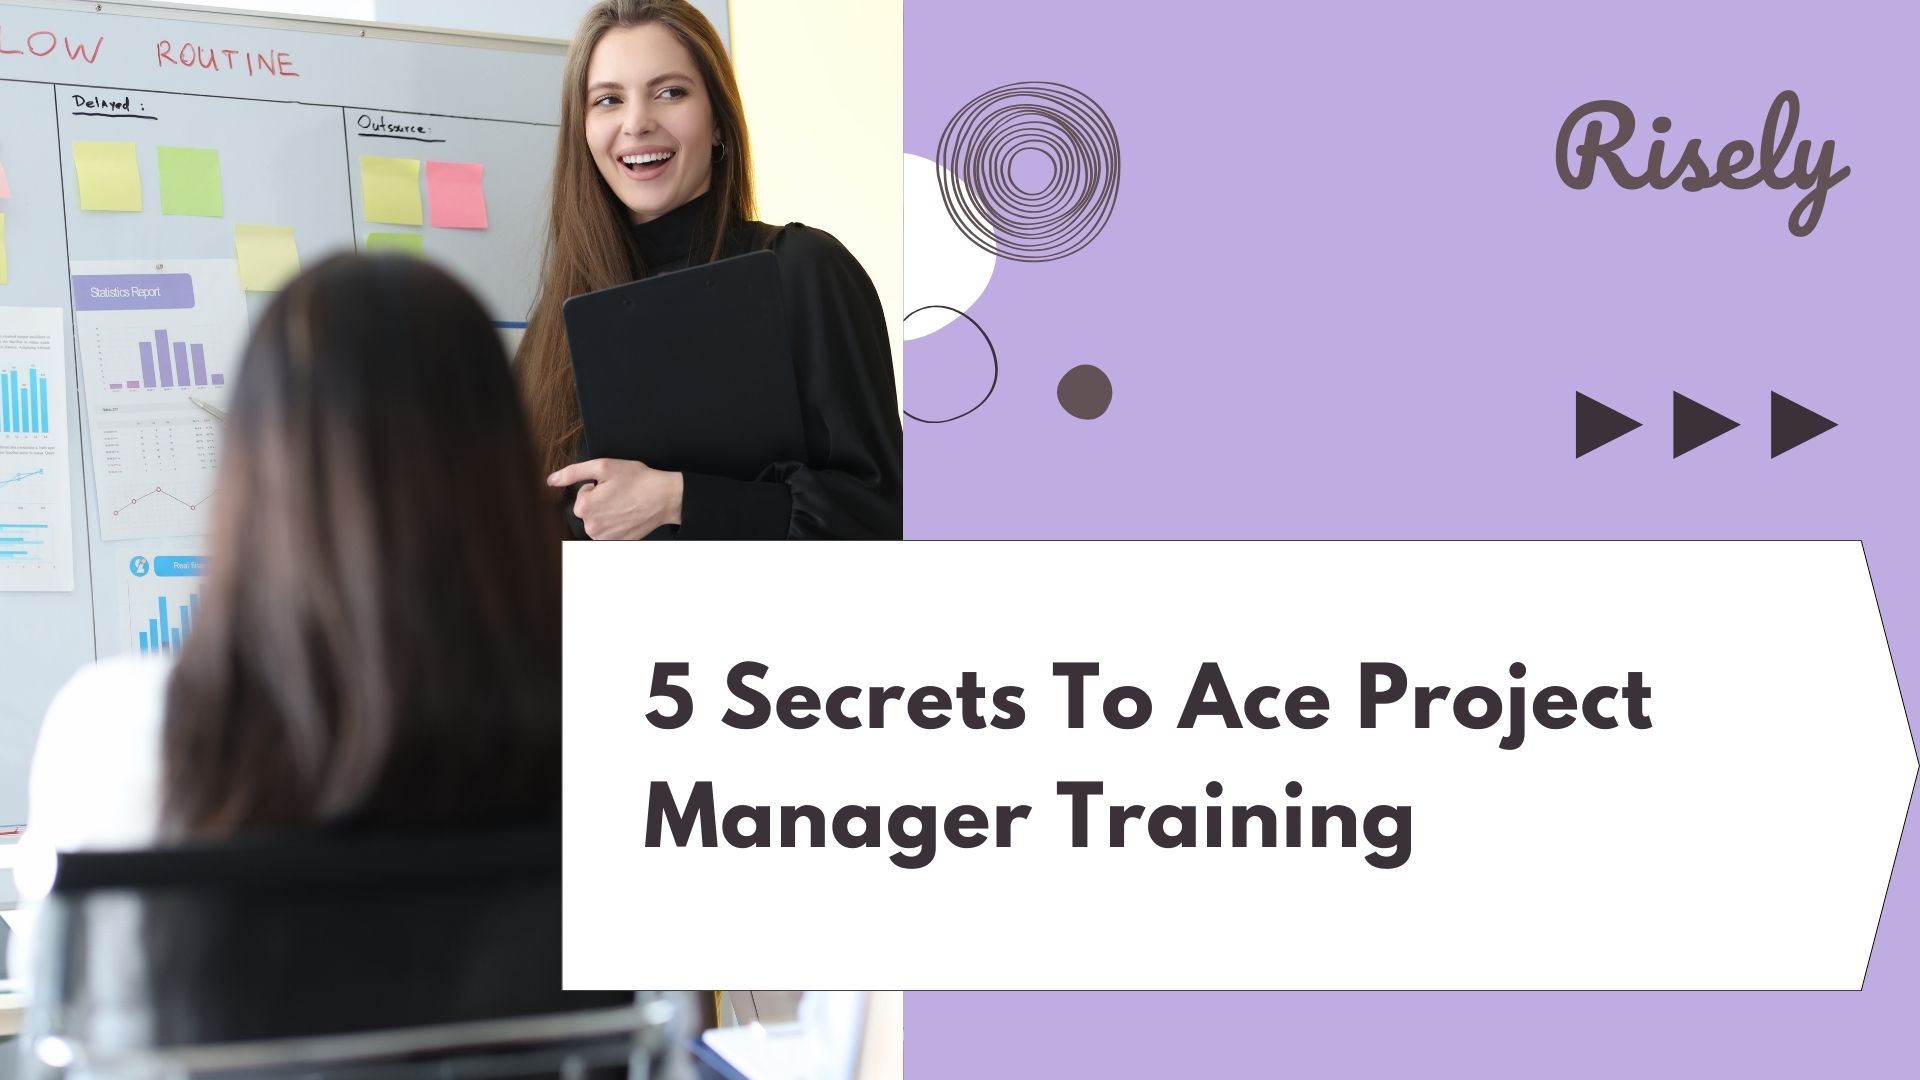 5 Secrets To Ace Project Manager Training